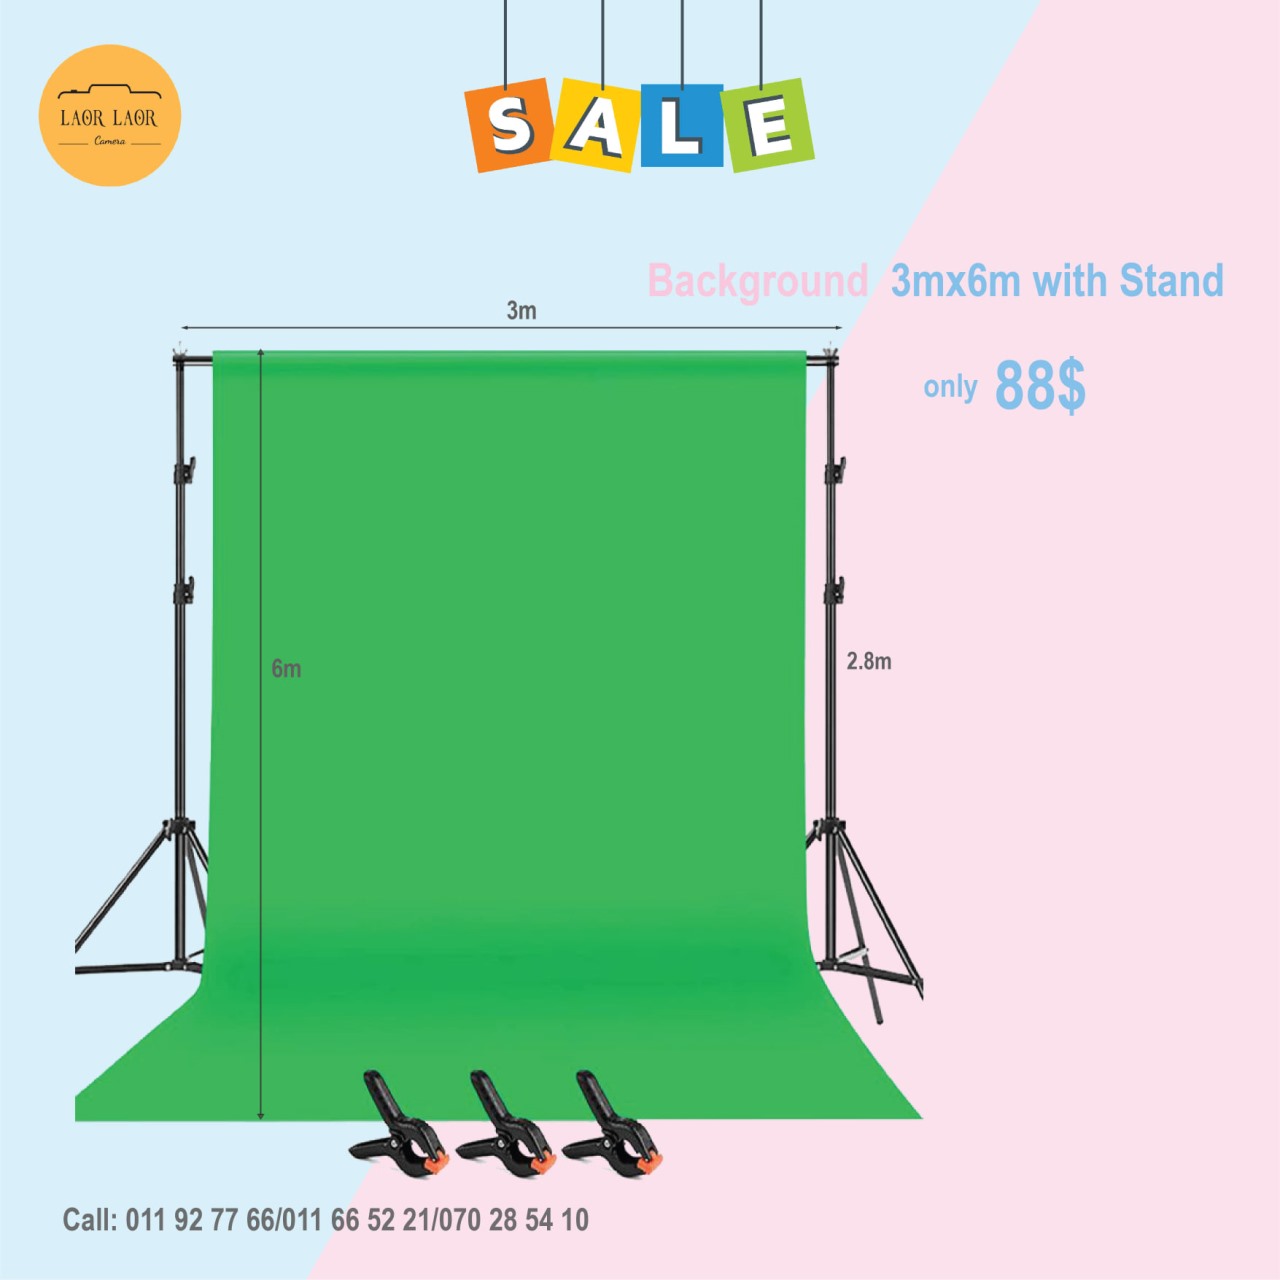 Background Clothes 3mx6m with Stand (Set)